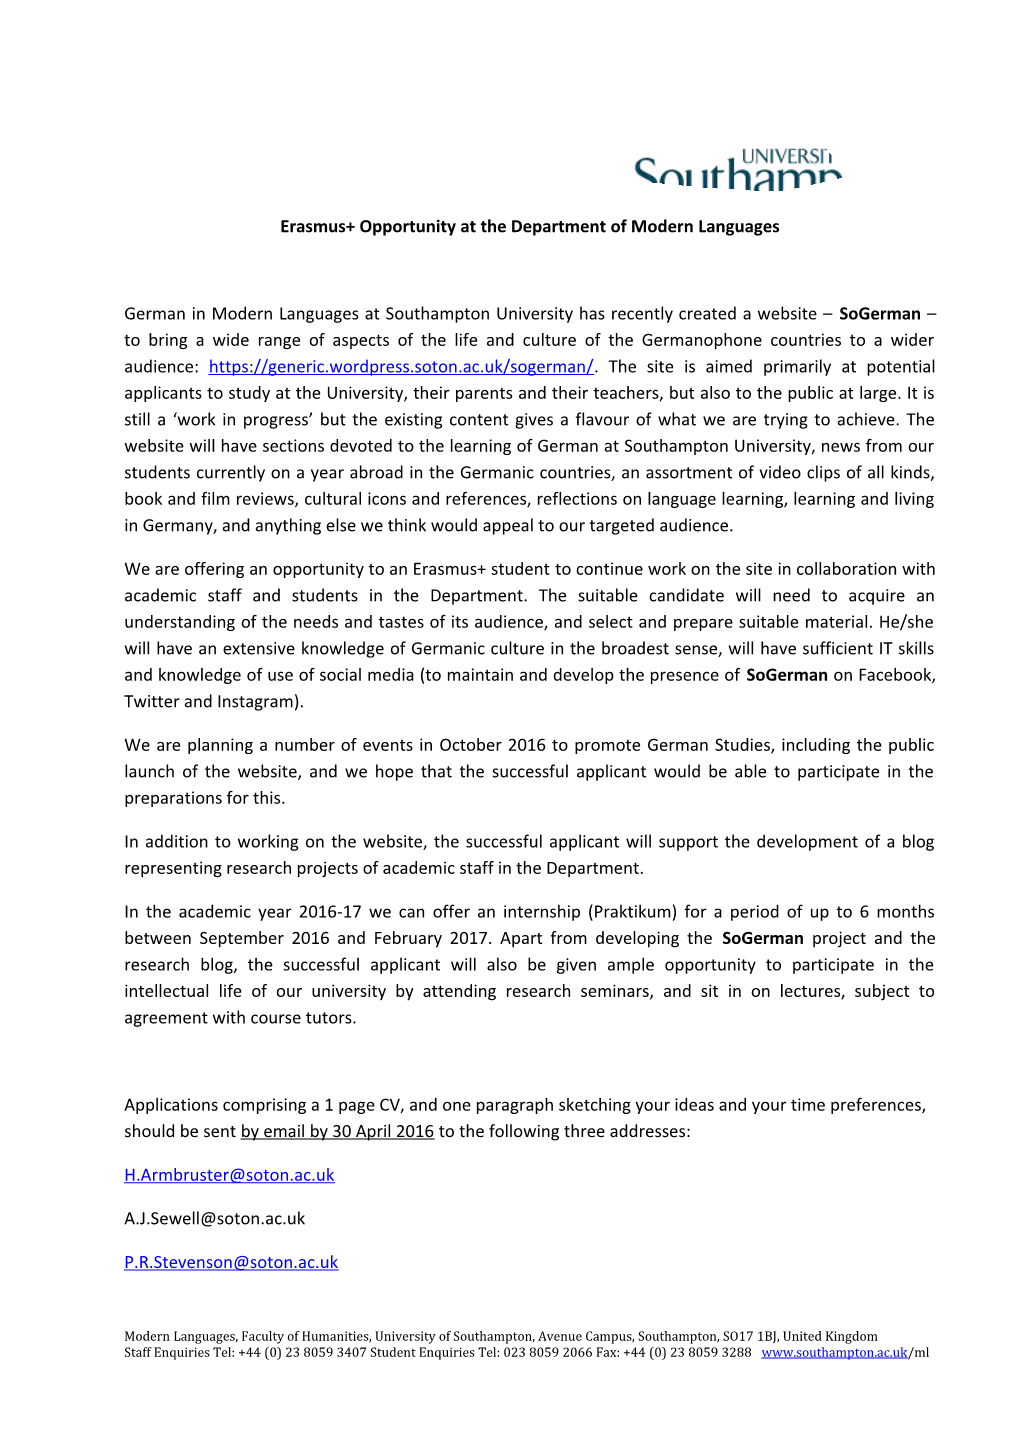 Erasmus+ Opportunity at the Department of Modern Languages